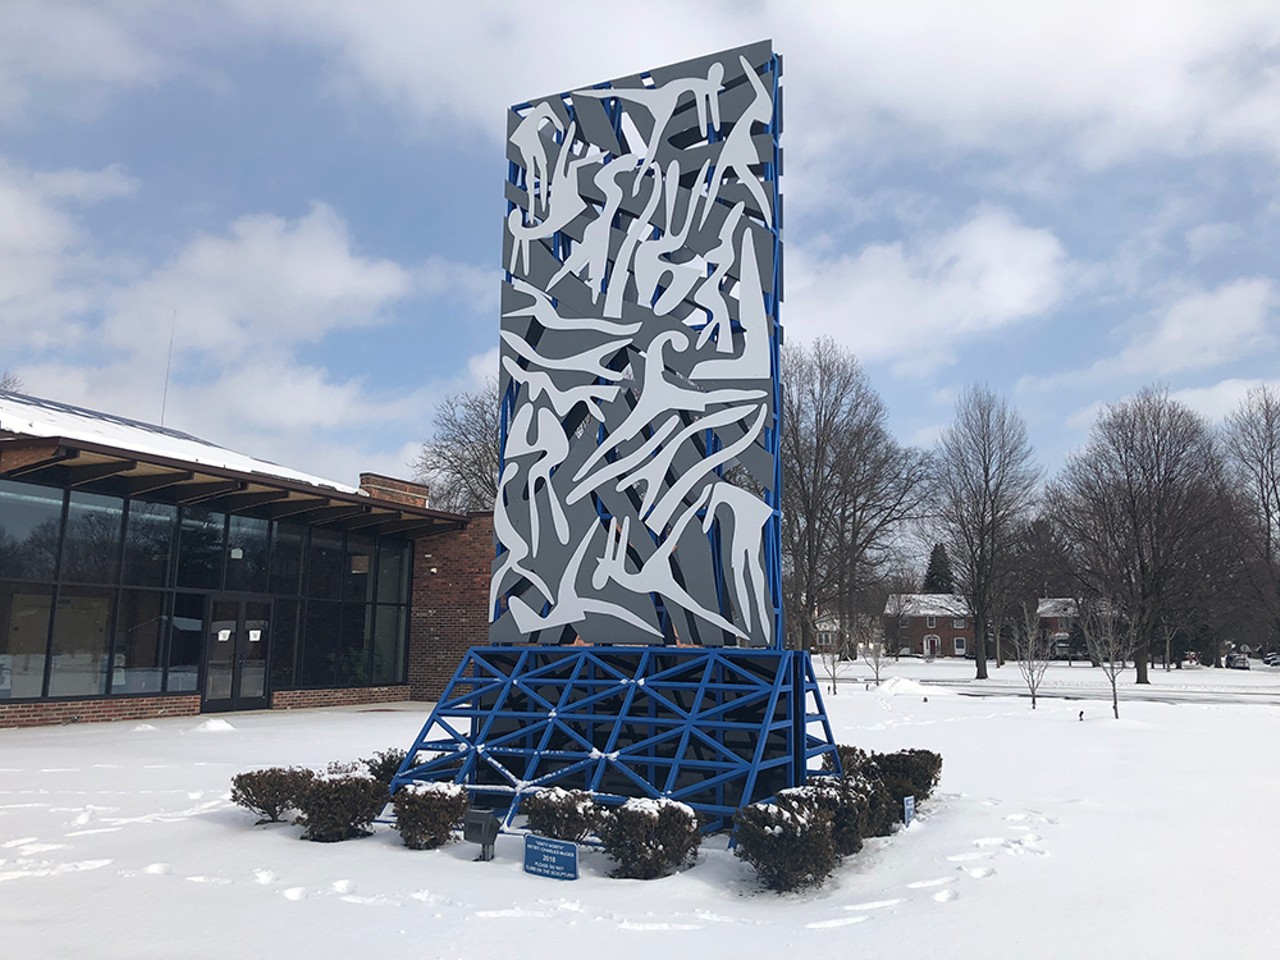 &#147;Unity North&#148;
North Rosedale Park Comunity House; 18445 Scarsdale St, Detroit;  313-837-3416; nrpca.org
Completed in 2018, this sculpture stands outside the North Rosedale Park Comunity House, near where McGee lived.
Photo by Lee DeVito